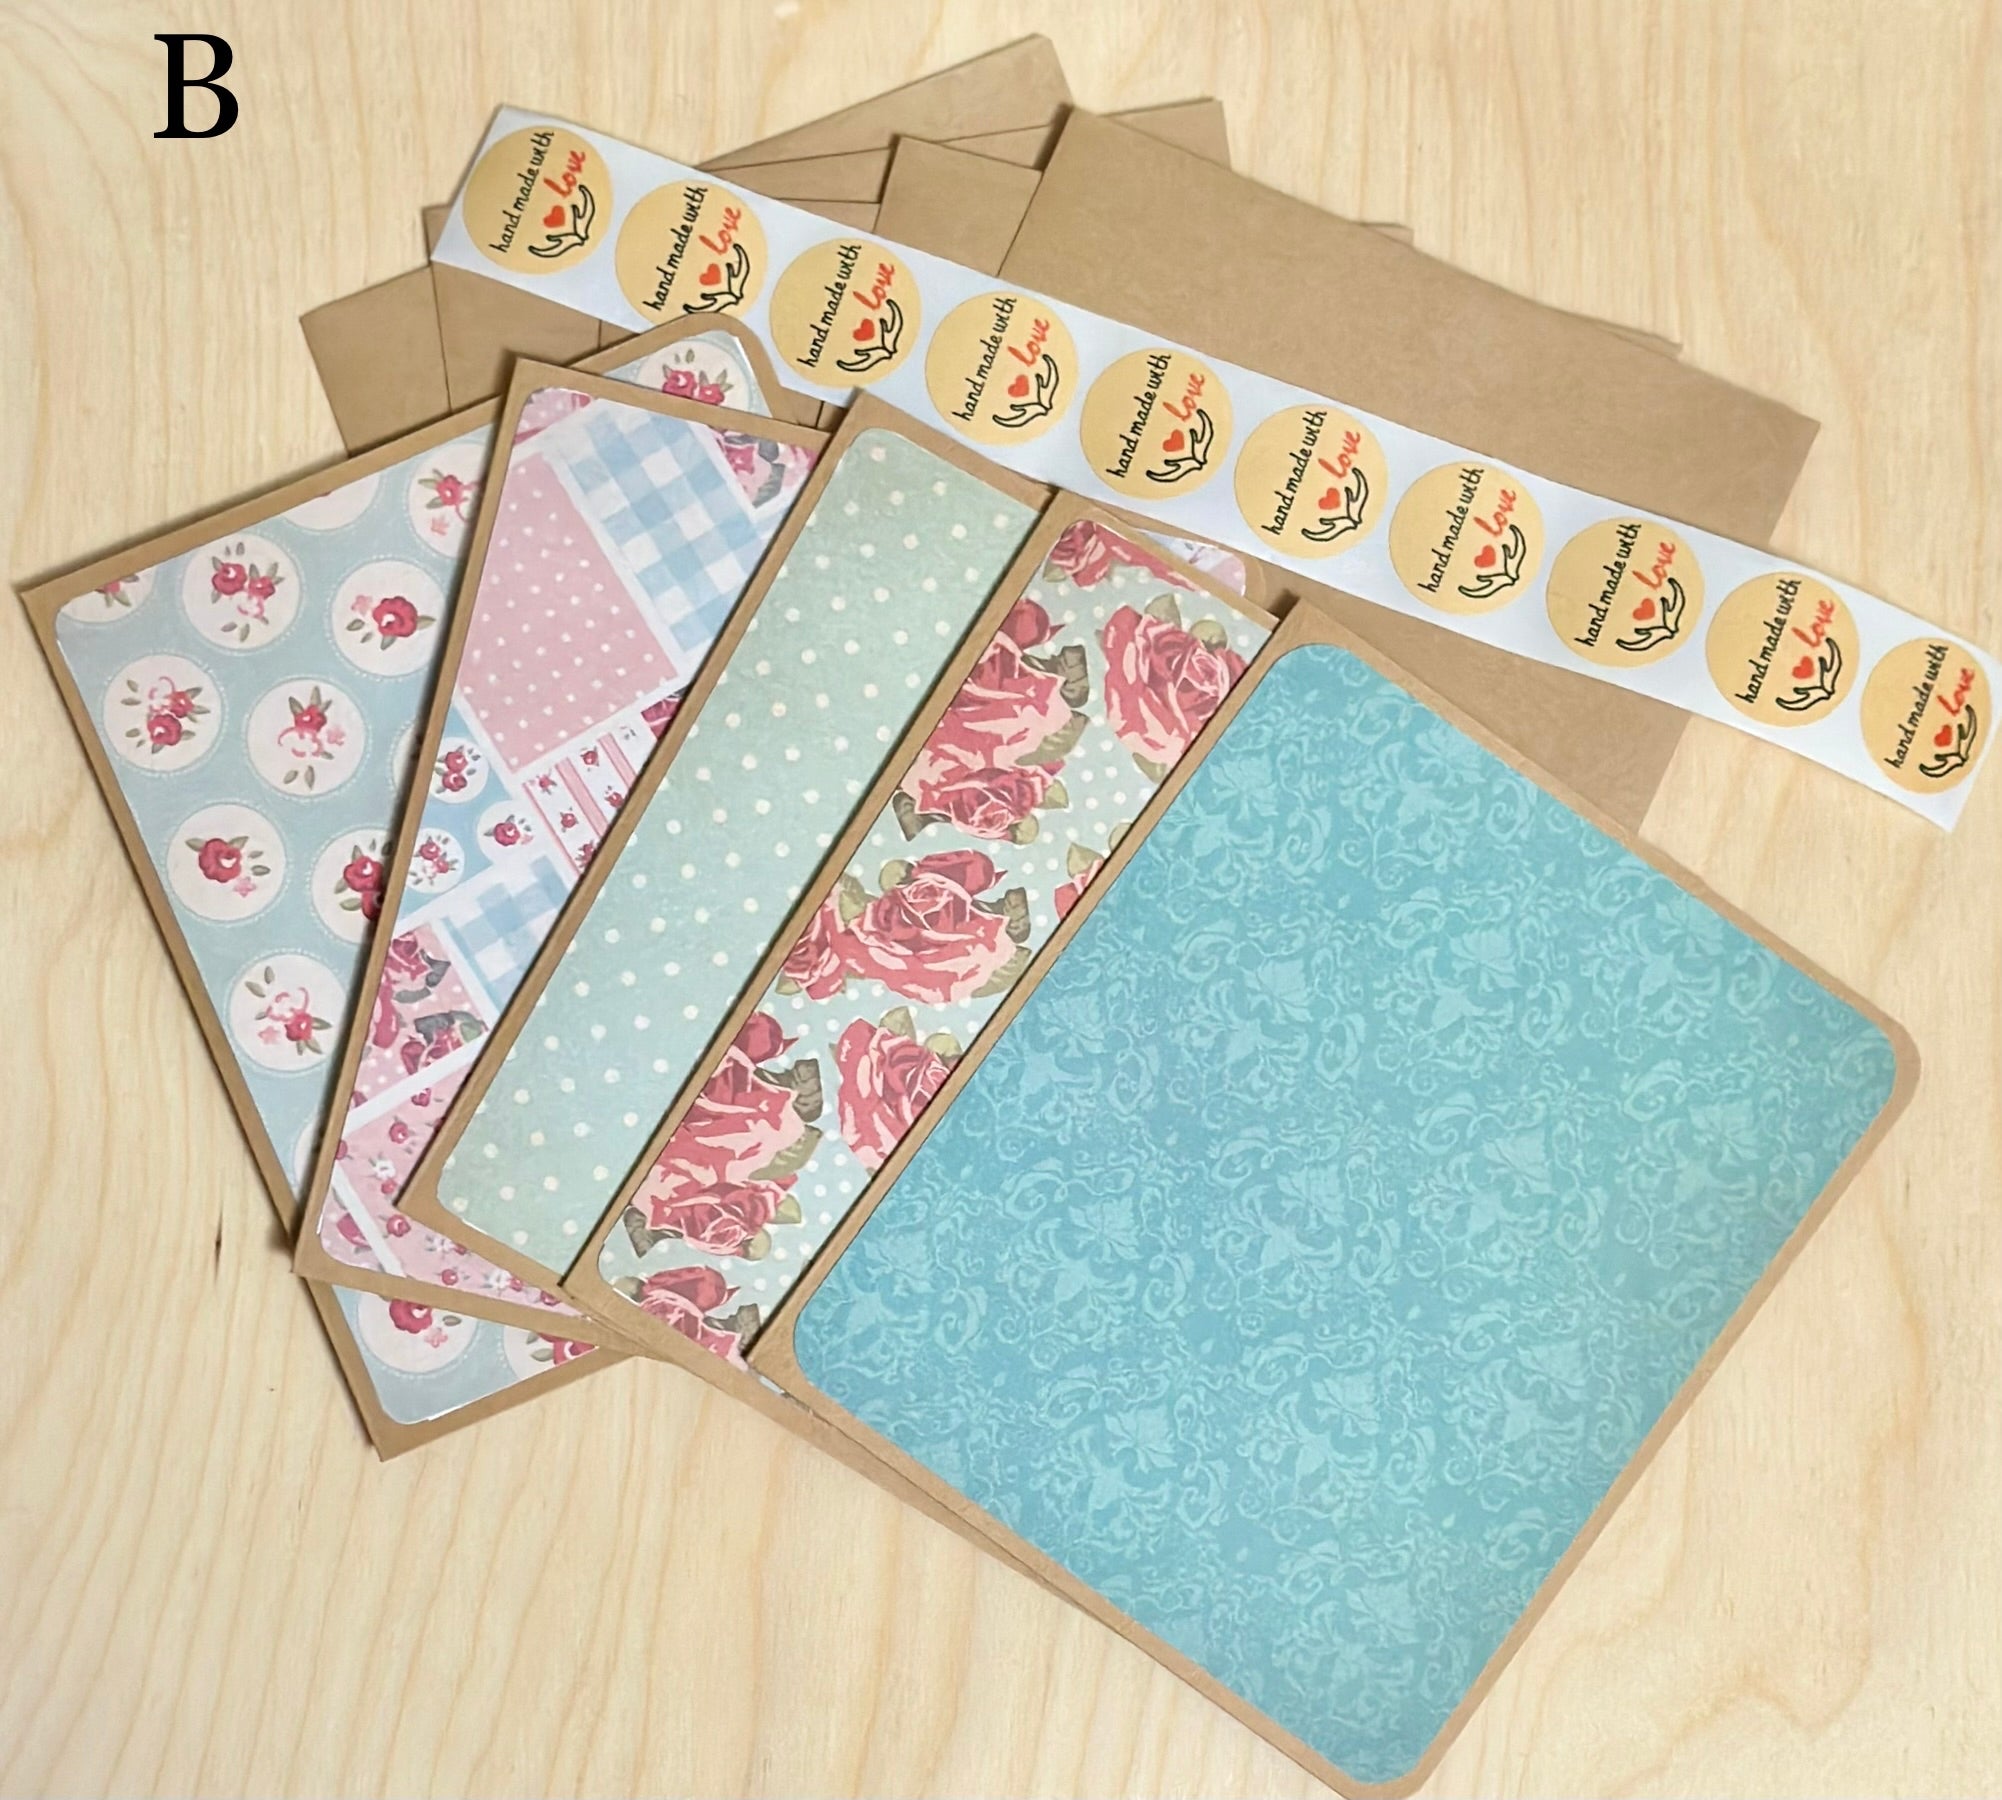 Handmade Small Floral Greeting Cards Set with Envelopes - Blank Cards Set - All Occasion...